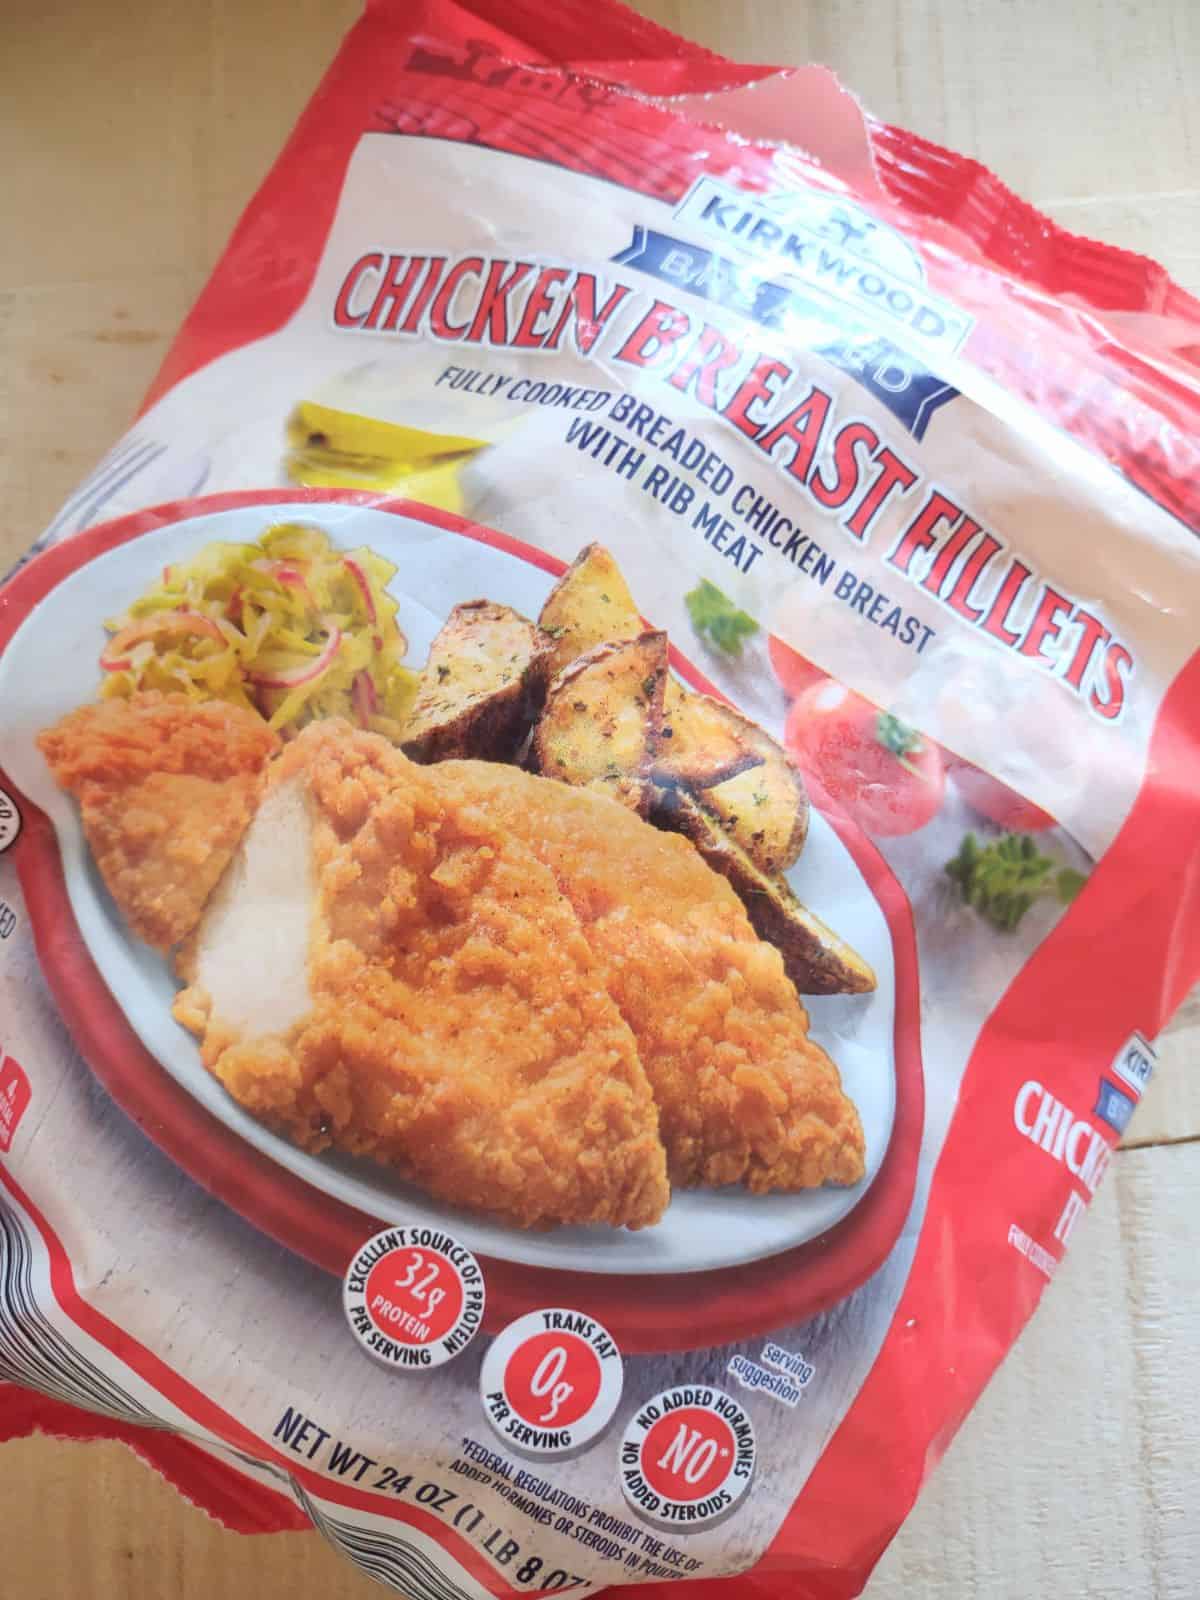 A red bag of Kirkwood Breaded Chicken Breast Fillets from ALDI